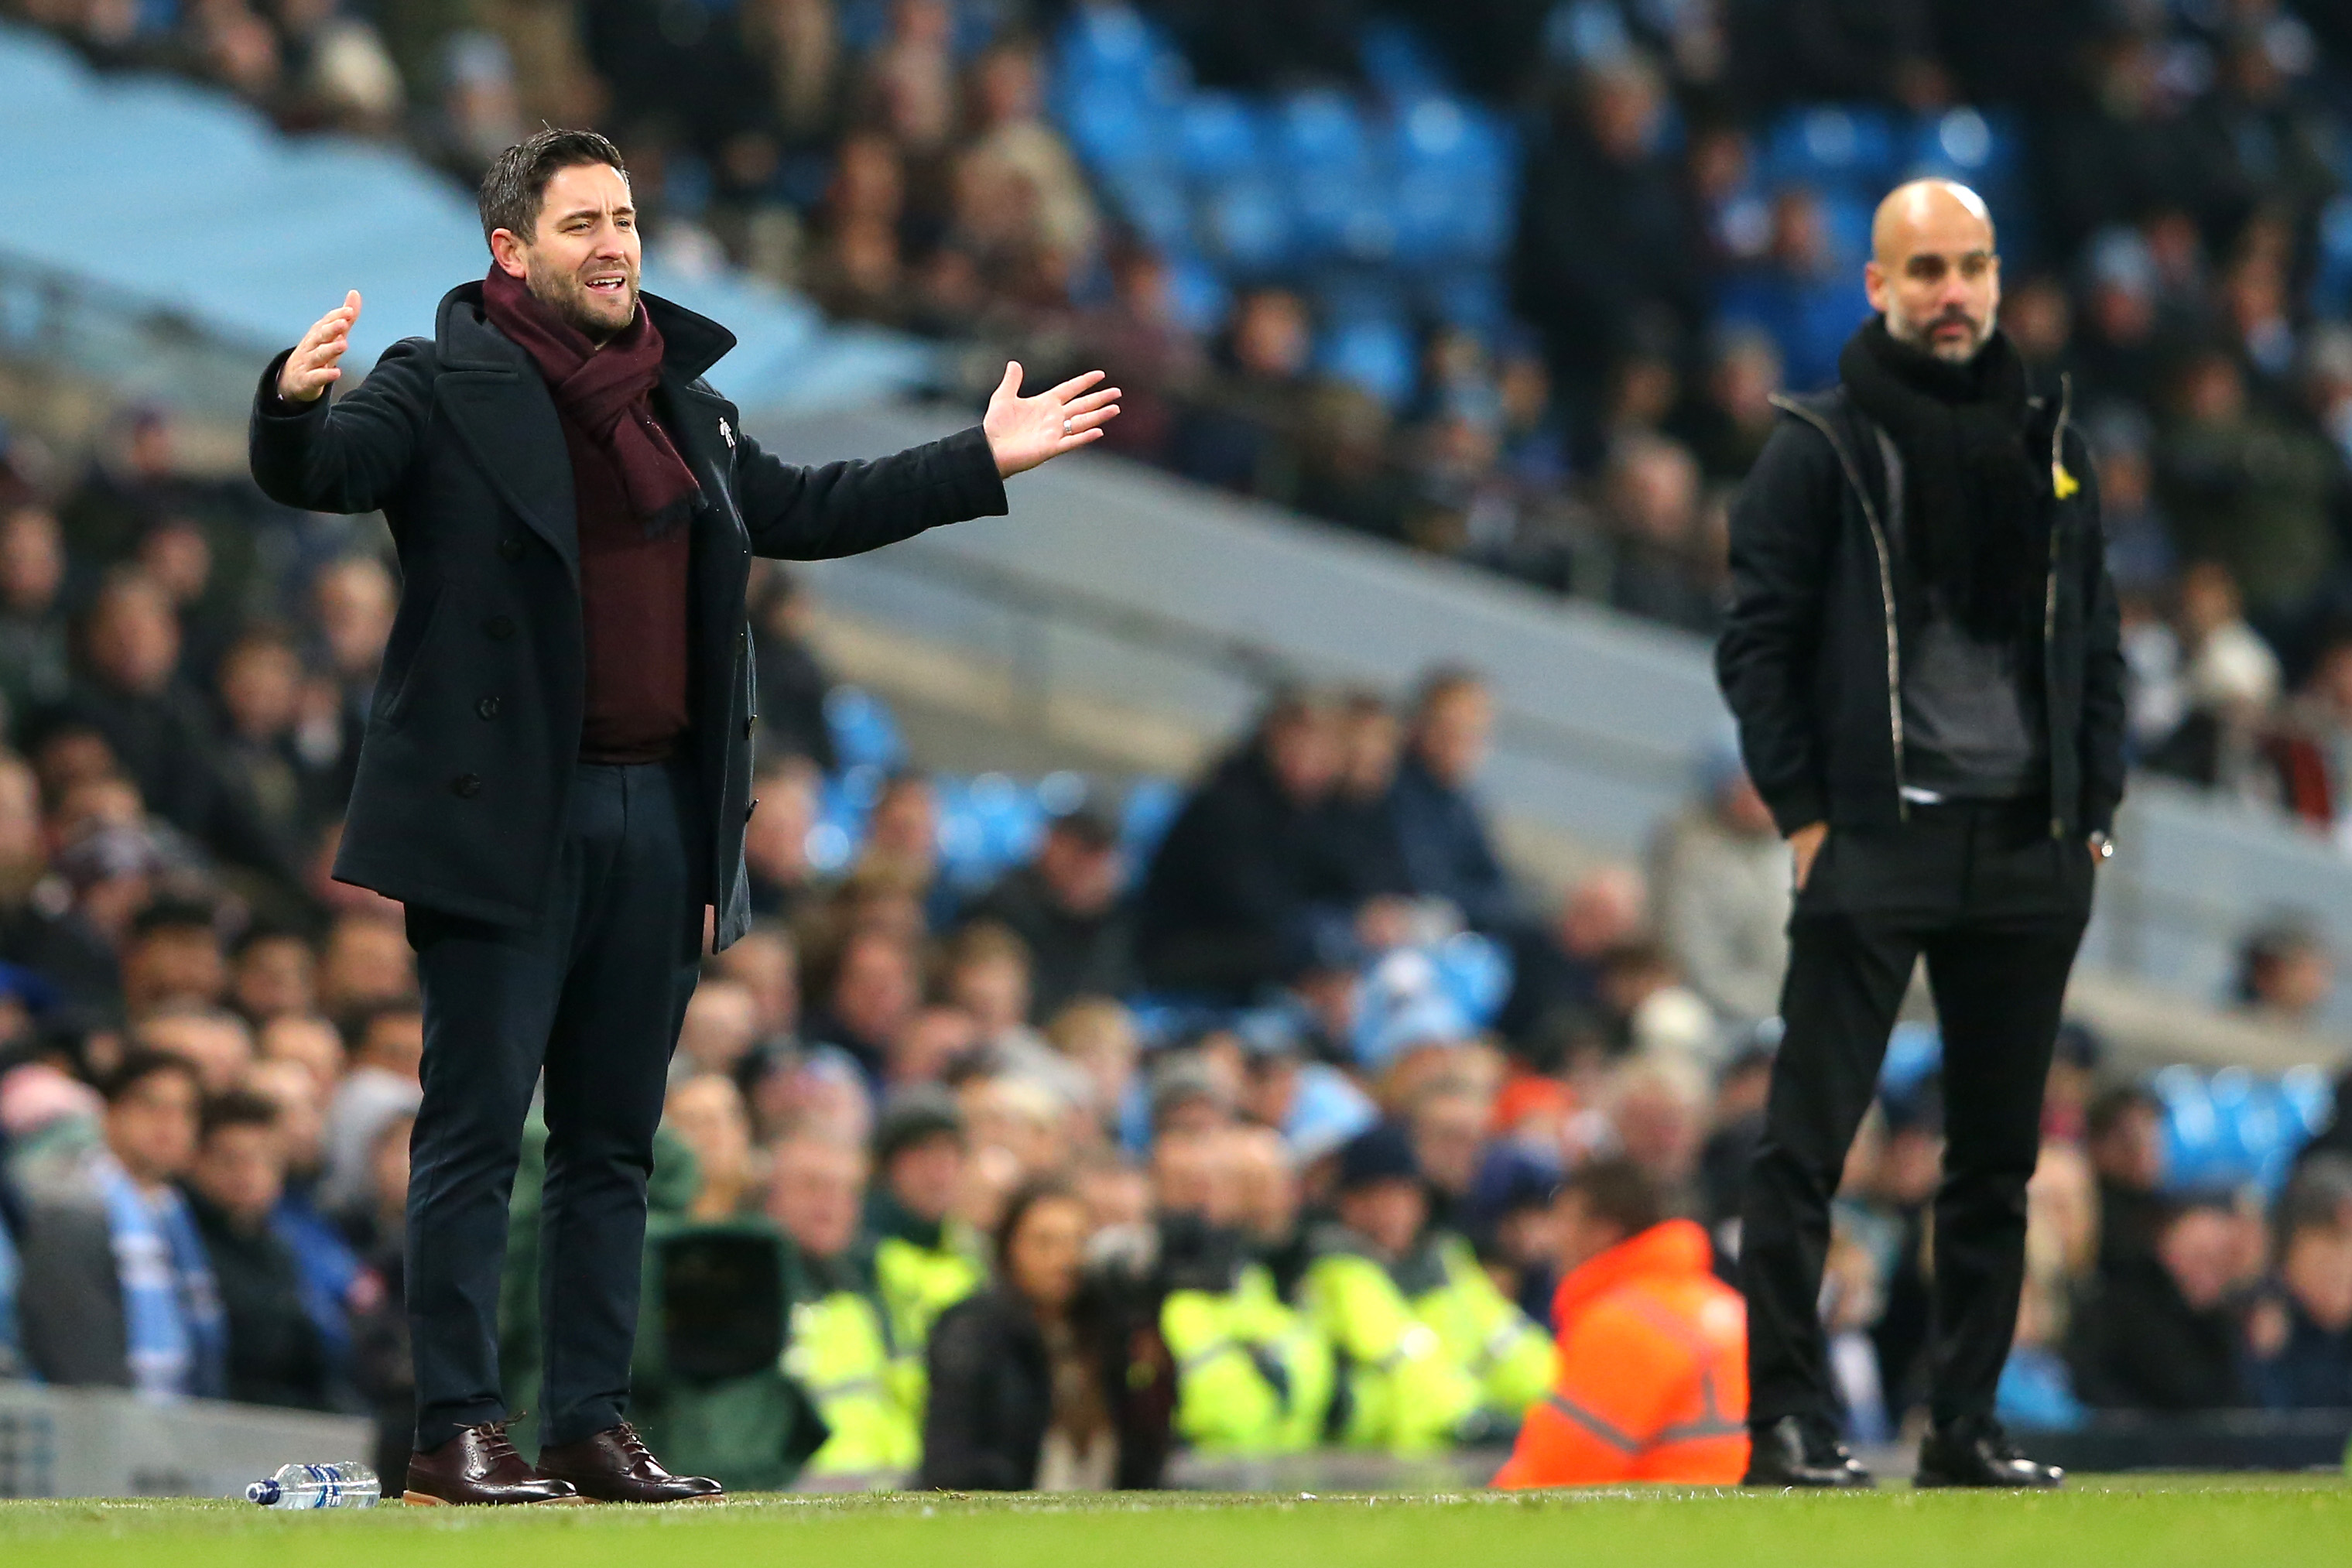 MANCHESTER, ENGLAND - JANUARY 09:  Lee Johnson, manager of Bristol City reacts as Josep Guardiola, Manager of Manchester City looks on during the Carabao Cup Semi-Final First Leg match between Manchester City and Bristol City at Etihad Stadium on January 9, 2018 in Manchester, England.  (Photo by Alex Livesey/Getty Images)